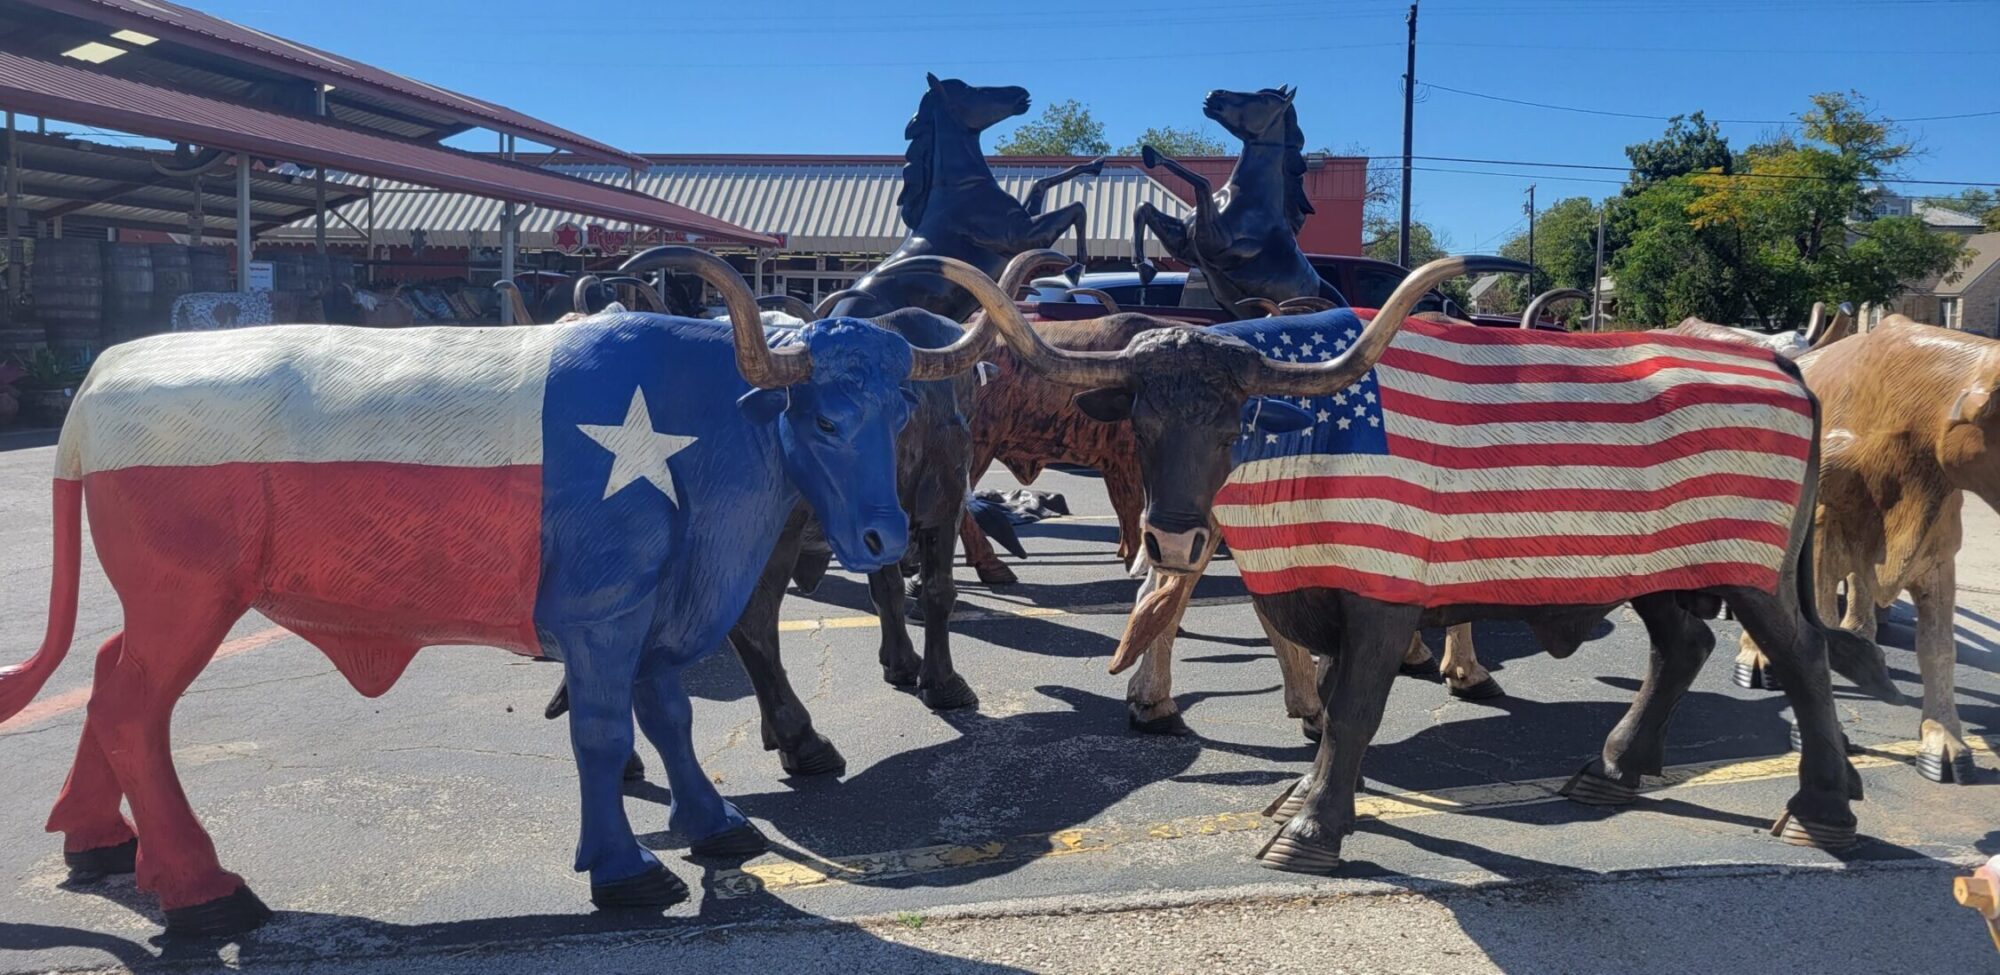 Lifesize heavy-cast longhorns painted to represent the Texas and American Flags. Available for sale or order at Rustler's Junction.